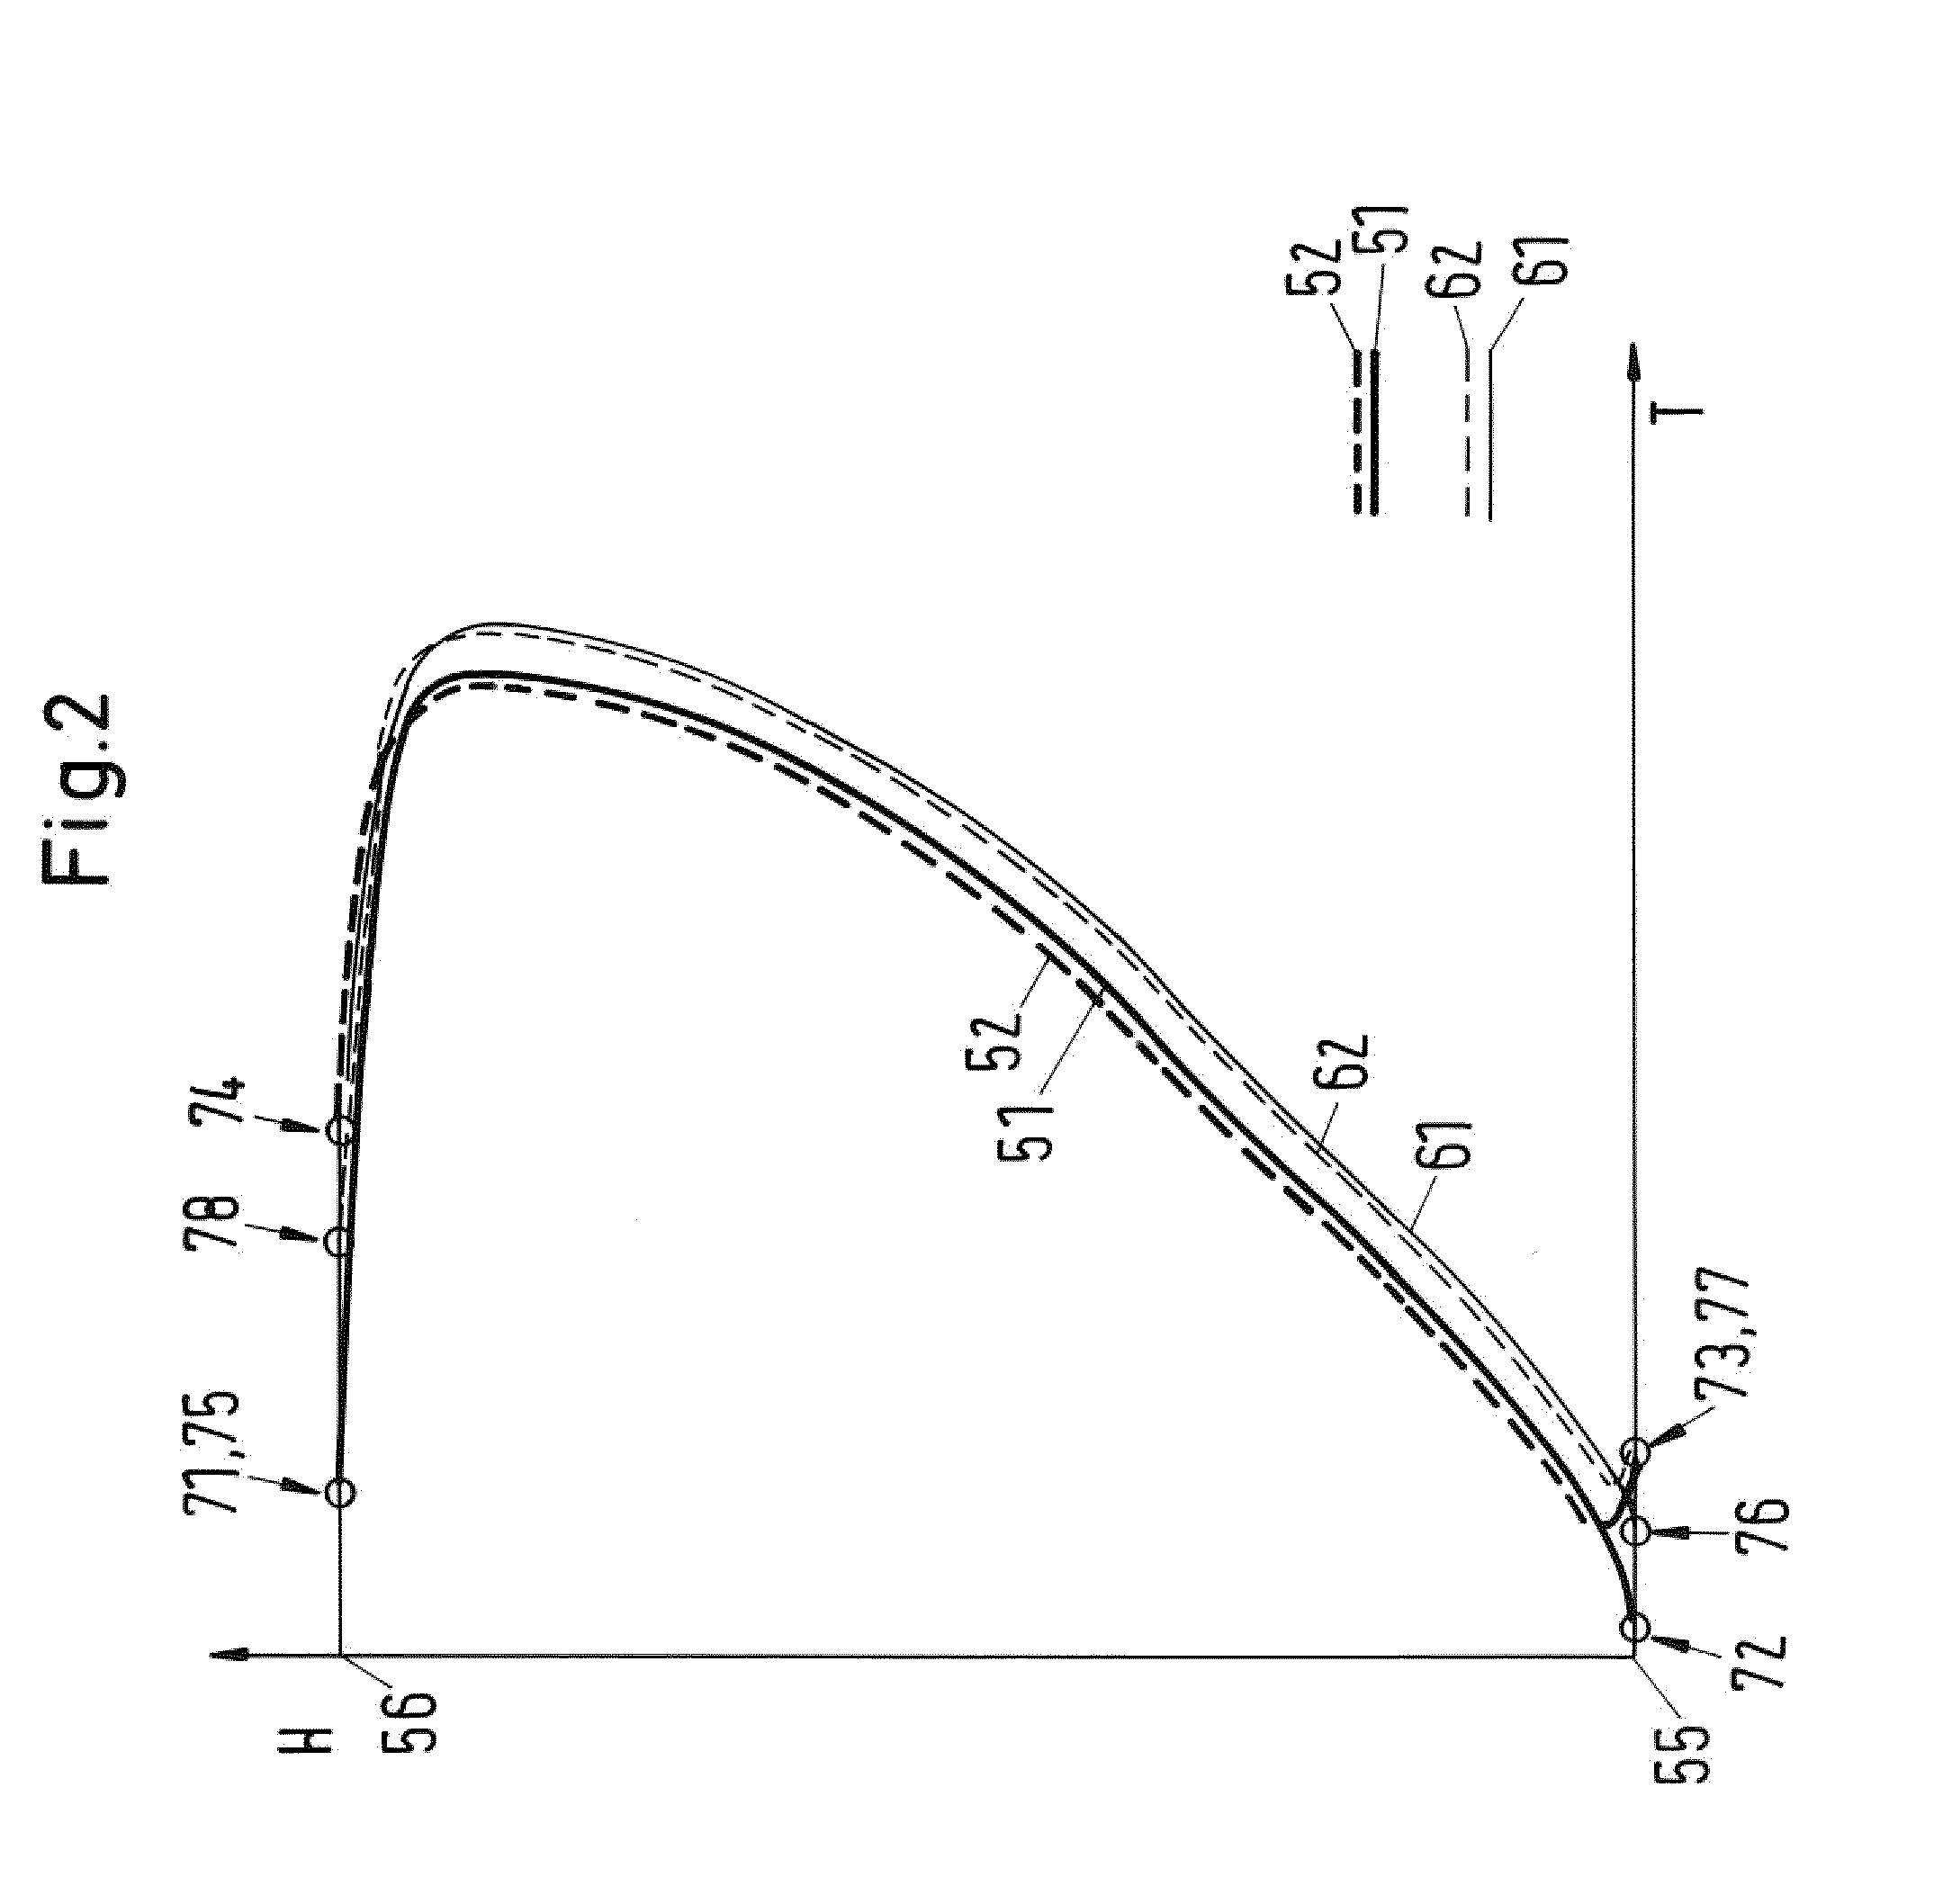 Method and an Apparatus for the Absorption of Carbon Dioxide